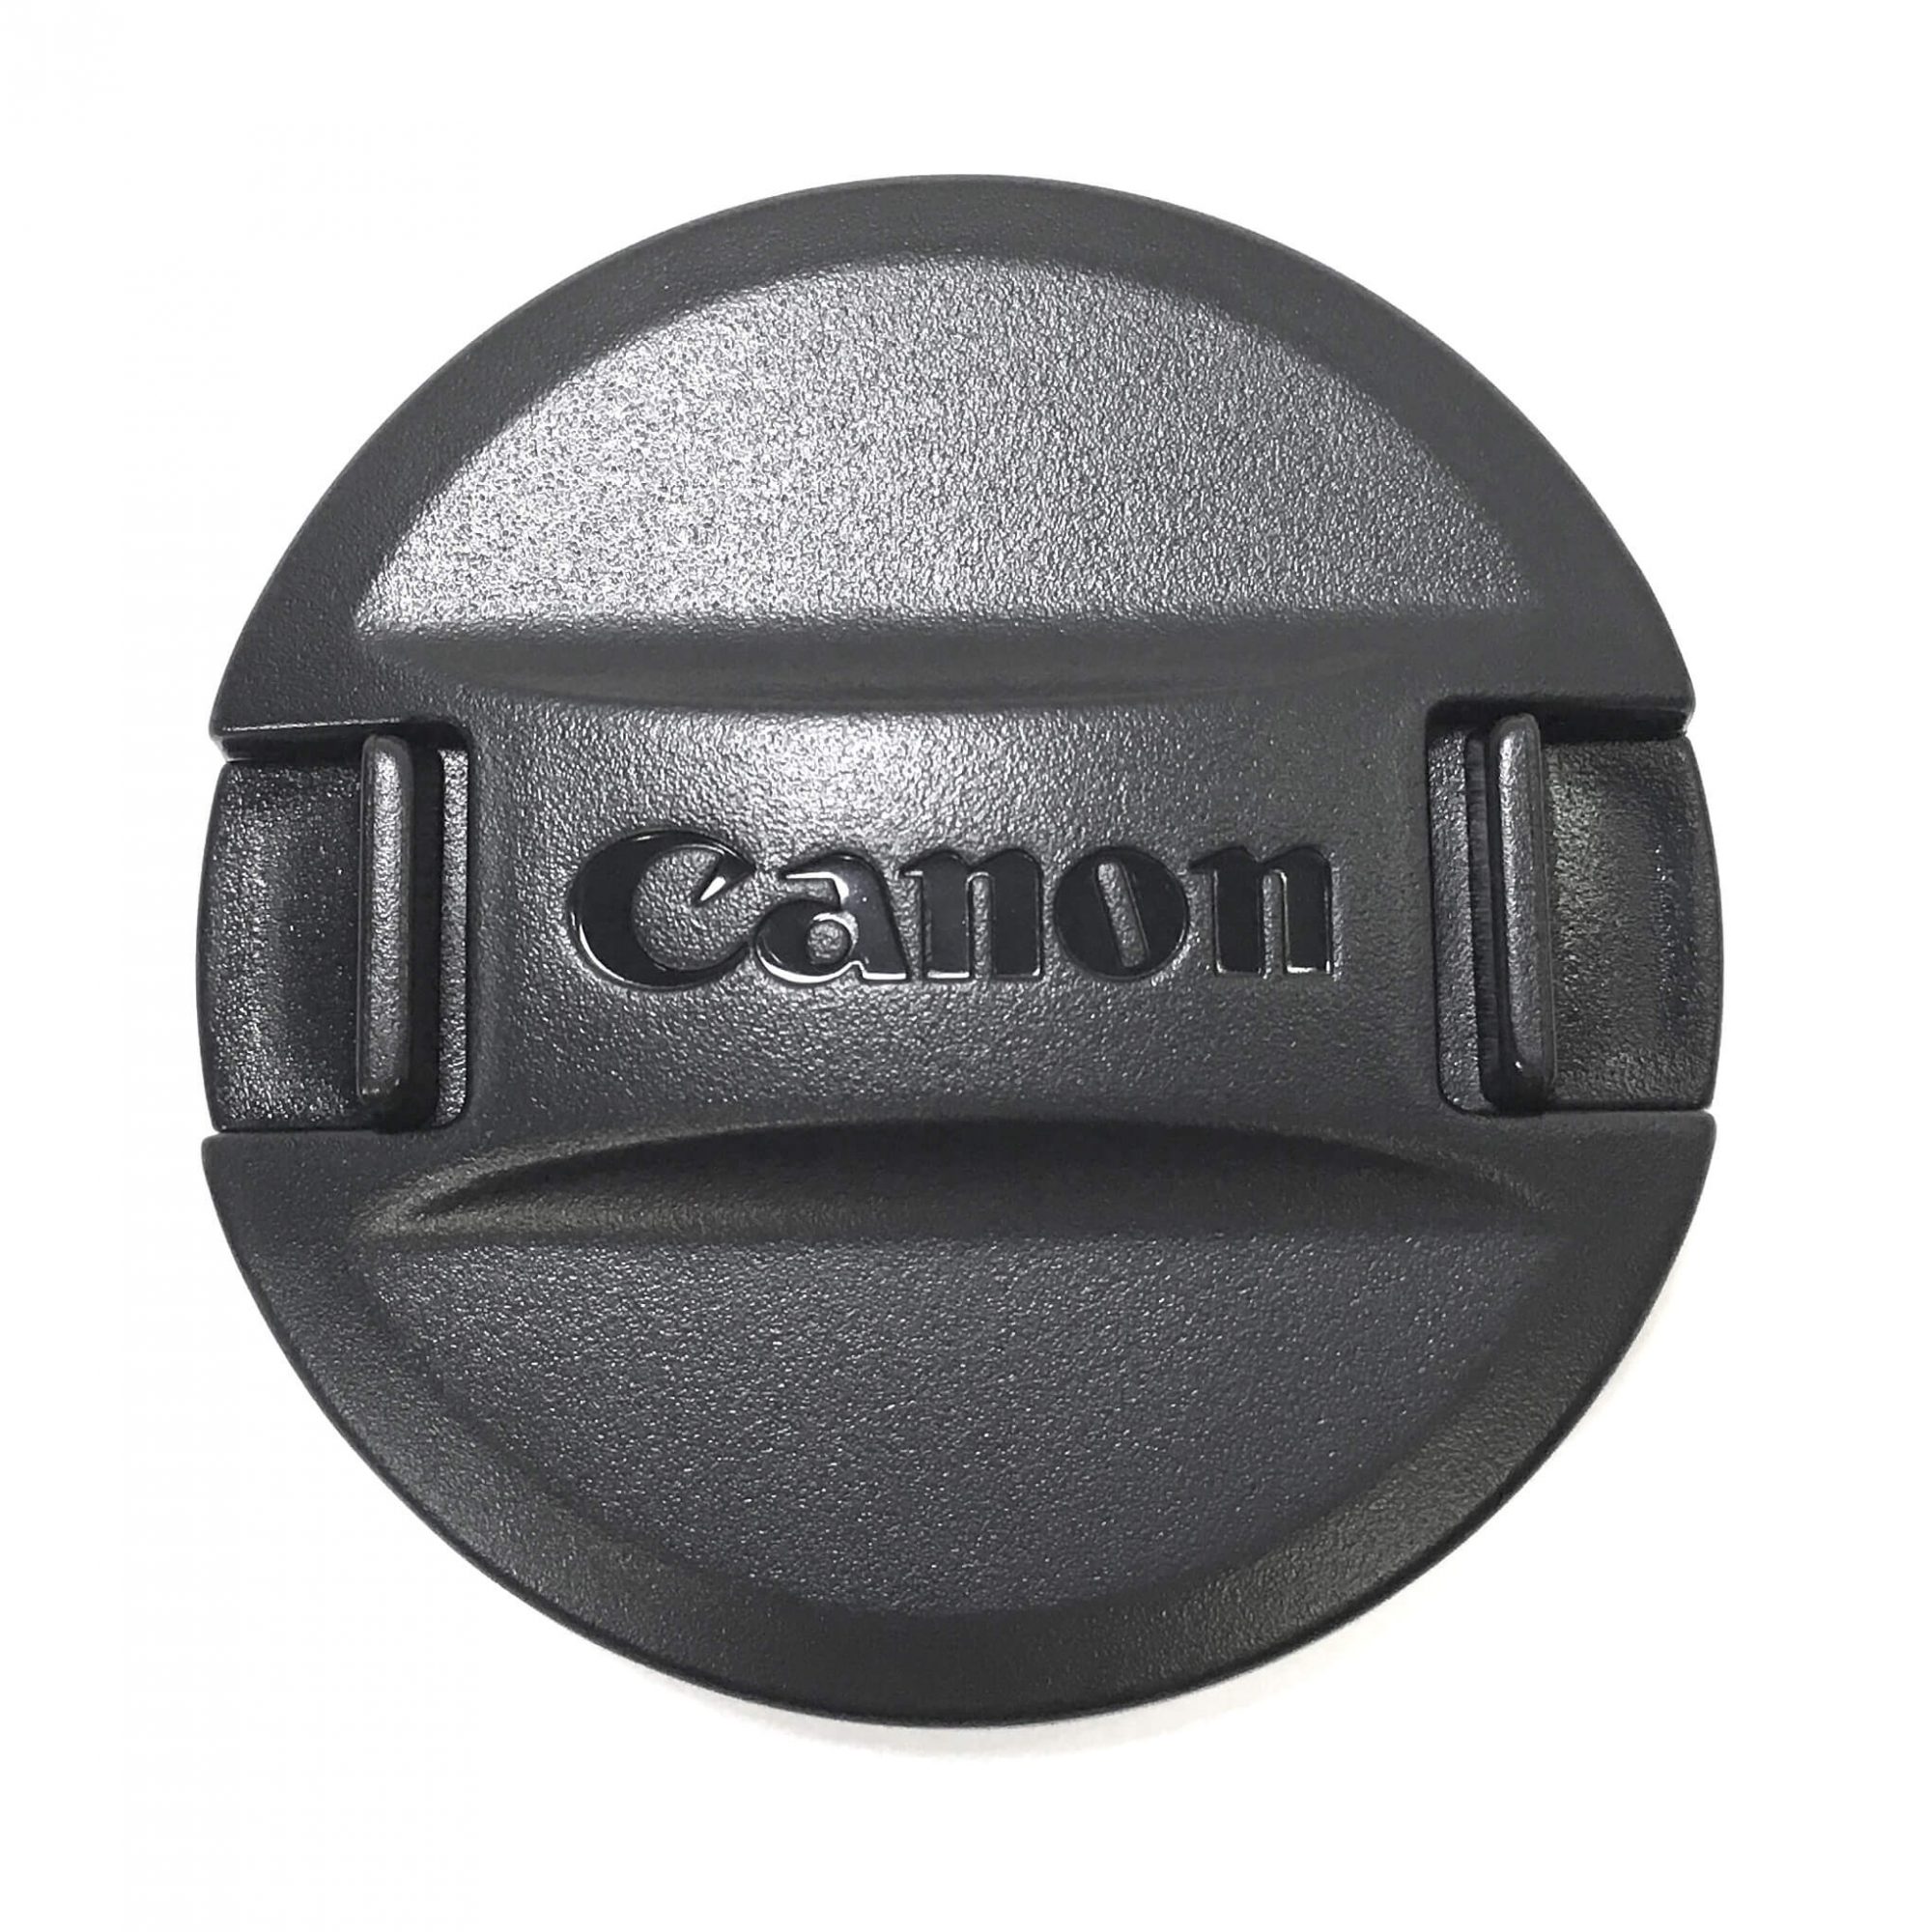 Original Lens Cap that fits on the the Canon XA20 camcorder. It is a genuine Canon part, sourced directly from Canon USA. Brand new factory fresh. Free Shipping.